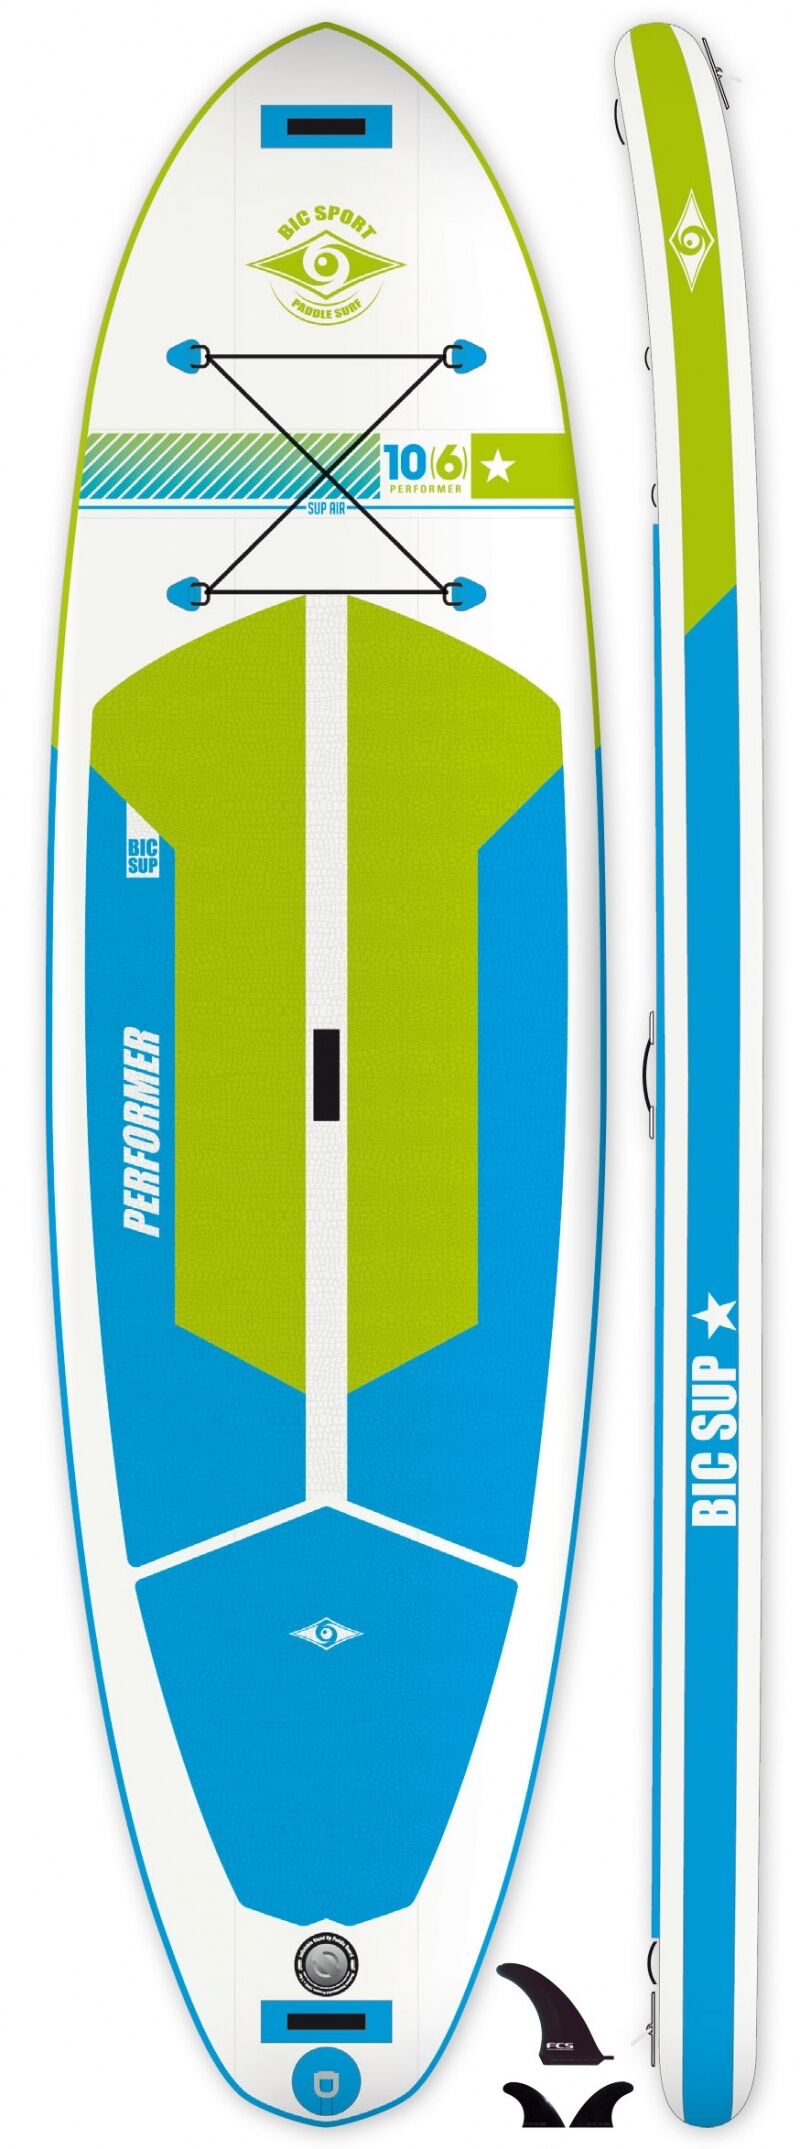 Tahe Outdoor - 10'6" Performer Air - SUP gonfiabile